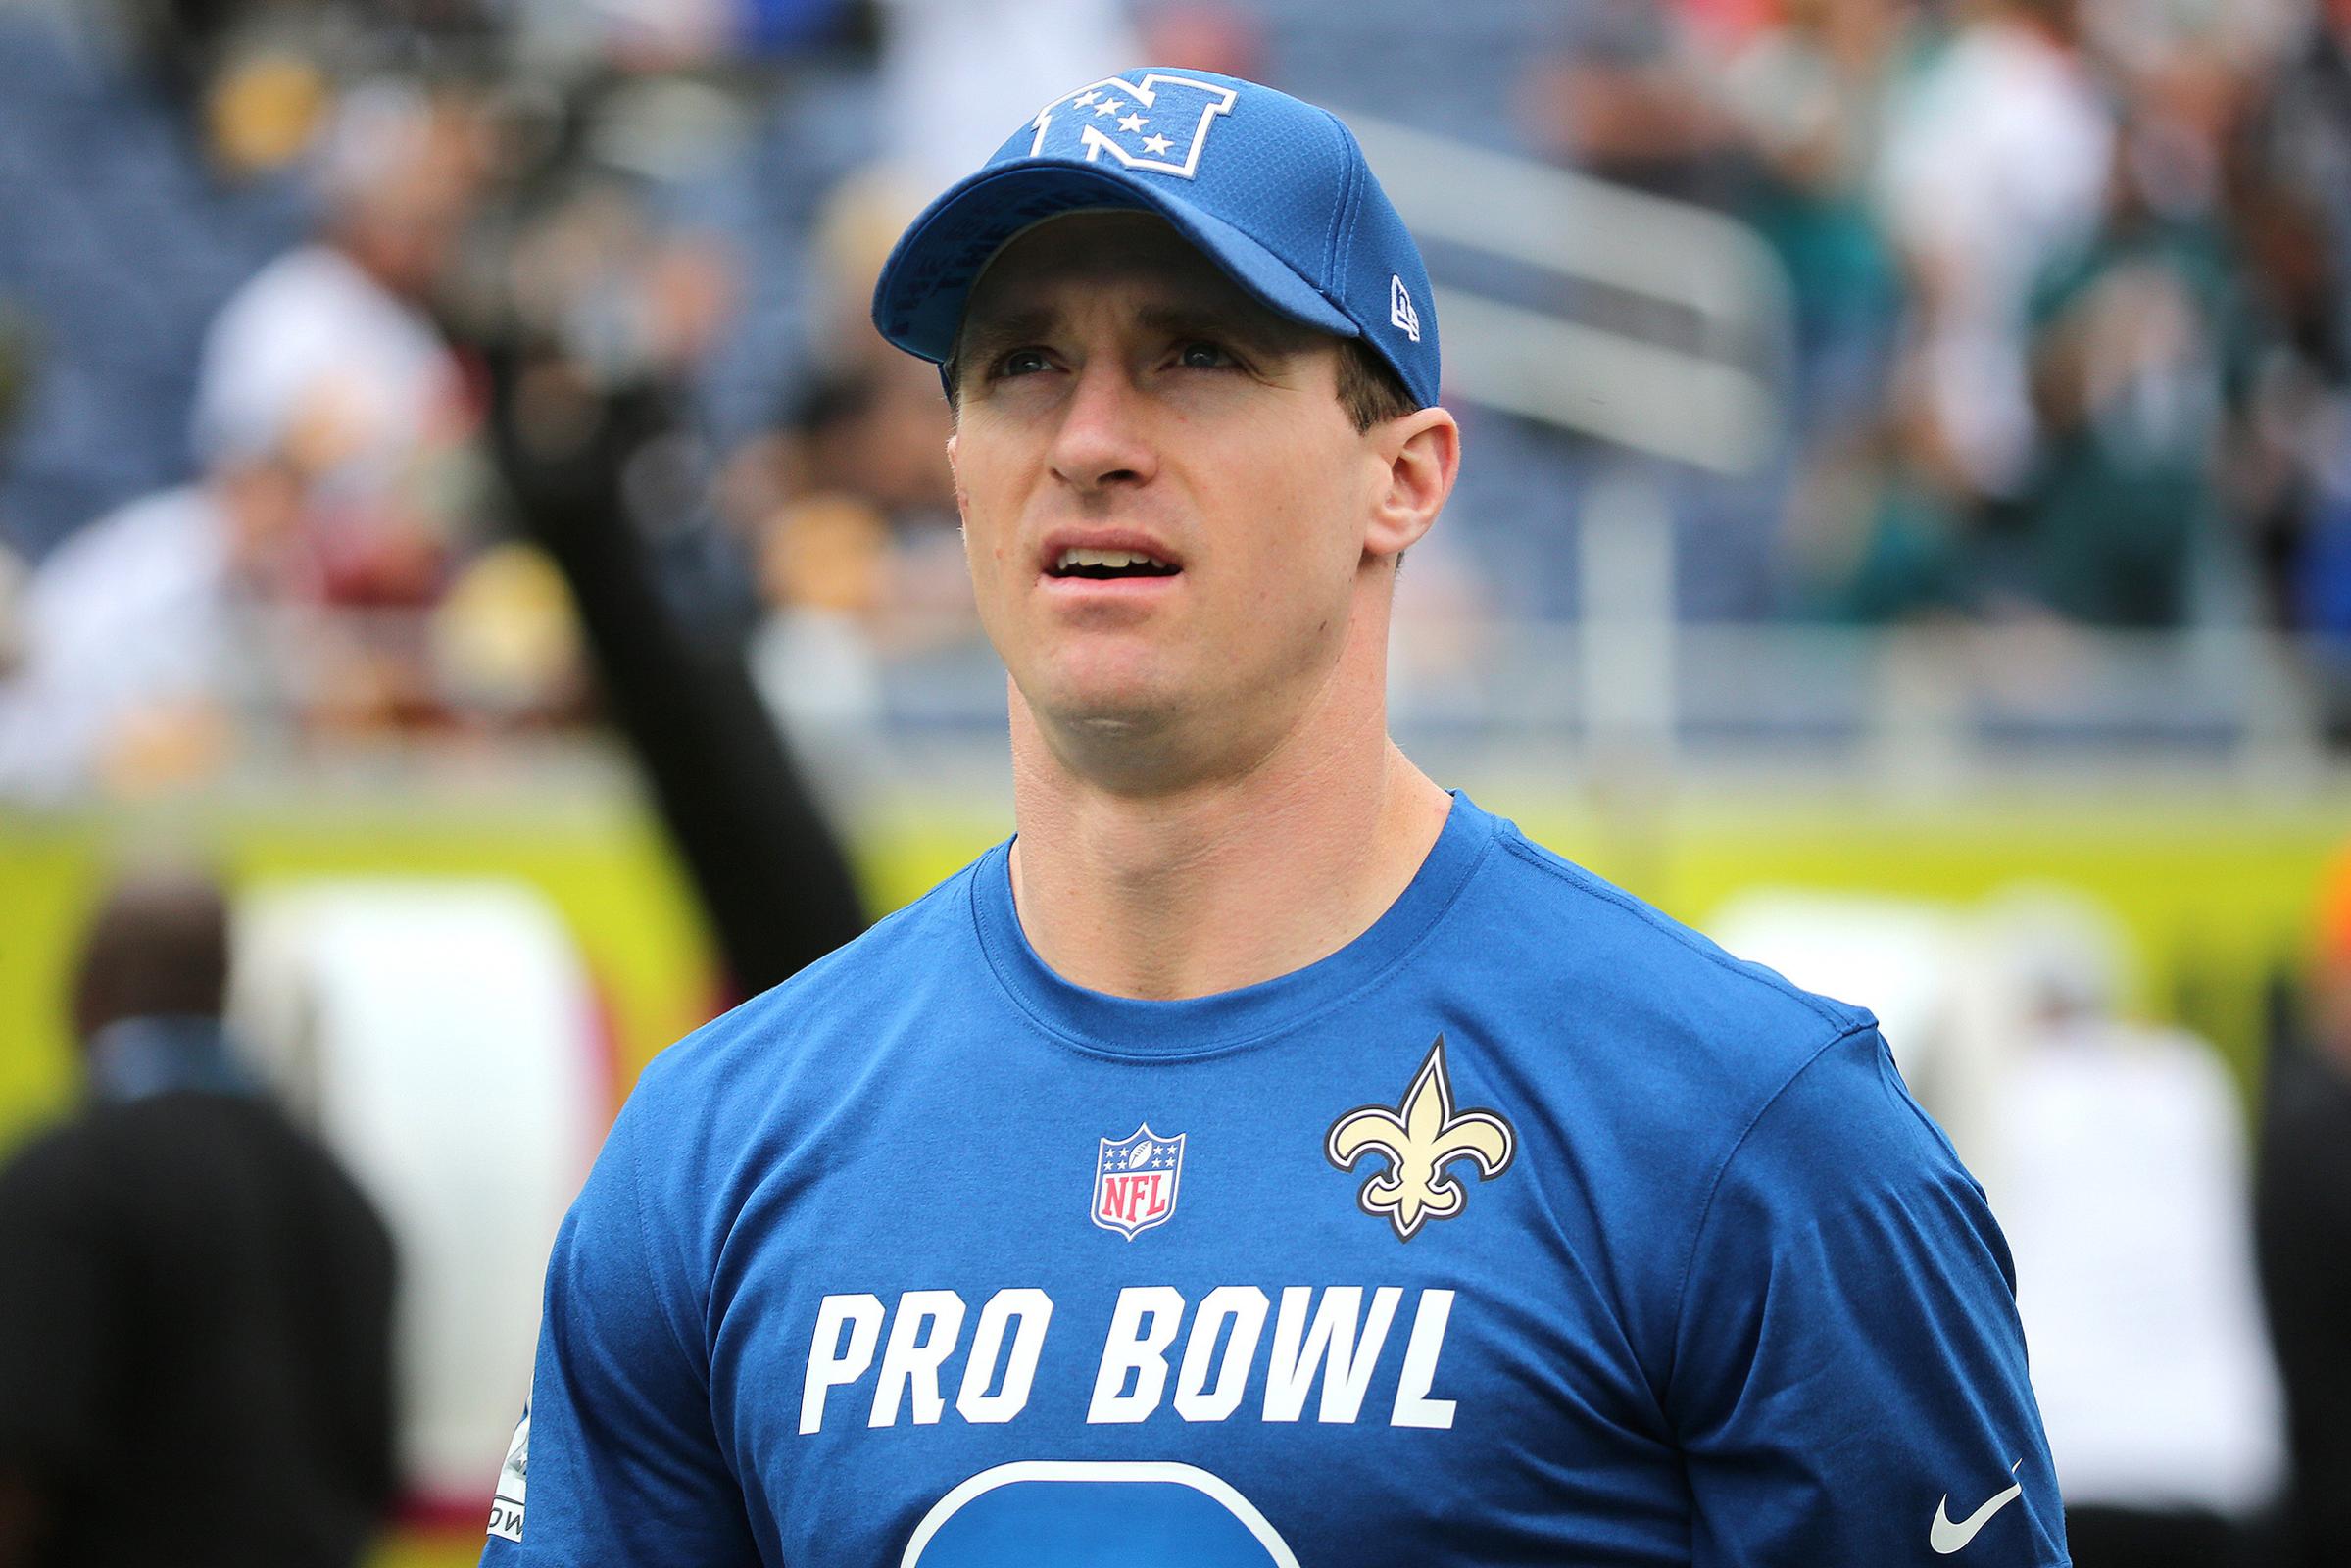 Drew Brees #9 of the New Orleans Saints warms up during the NFL Pro Bowl between the AFC and NFC at Camping World Stadium on Jan. 28, 2018.